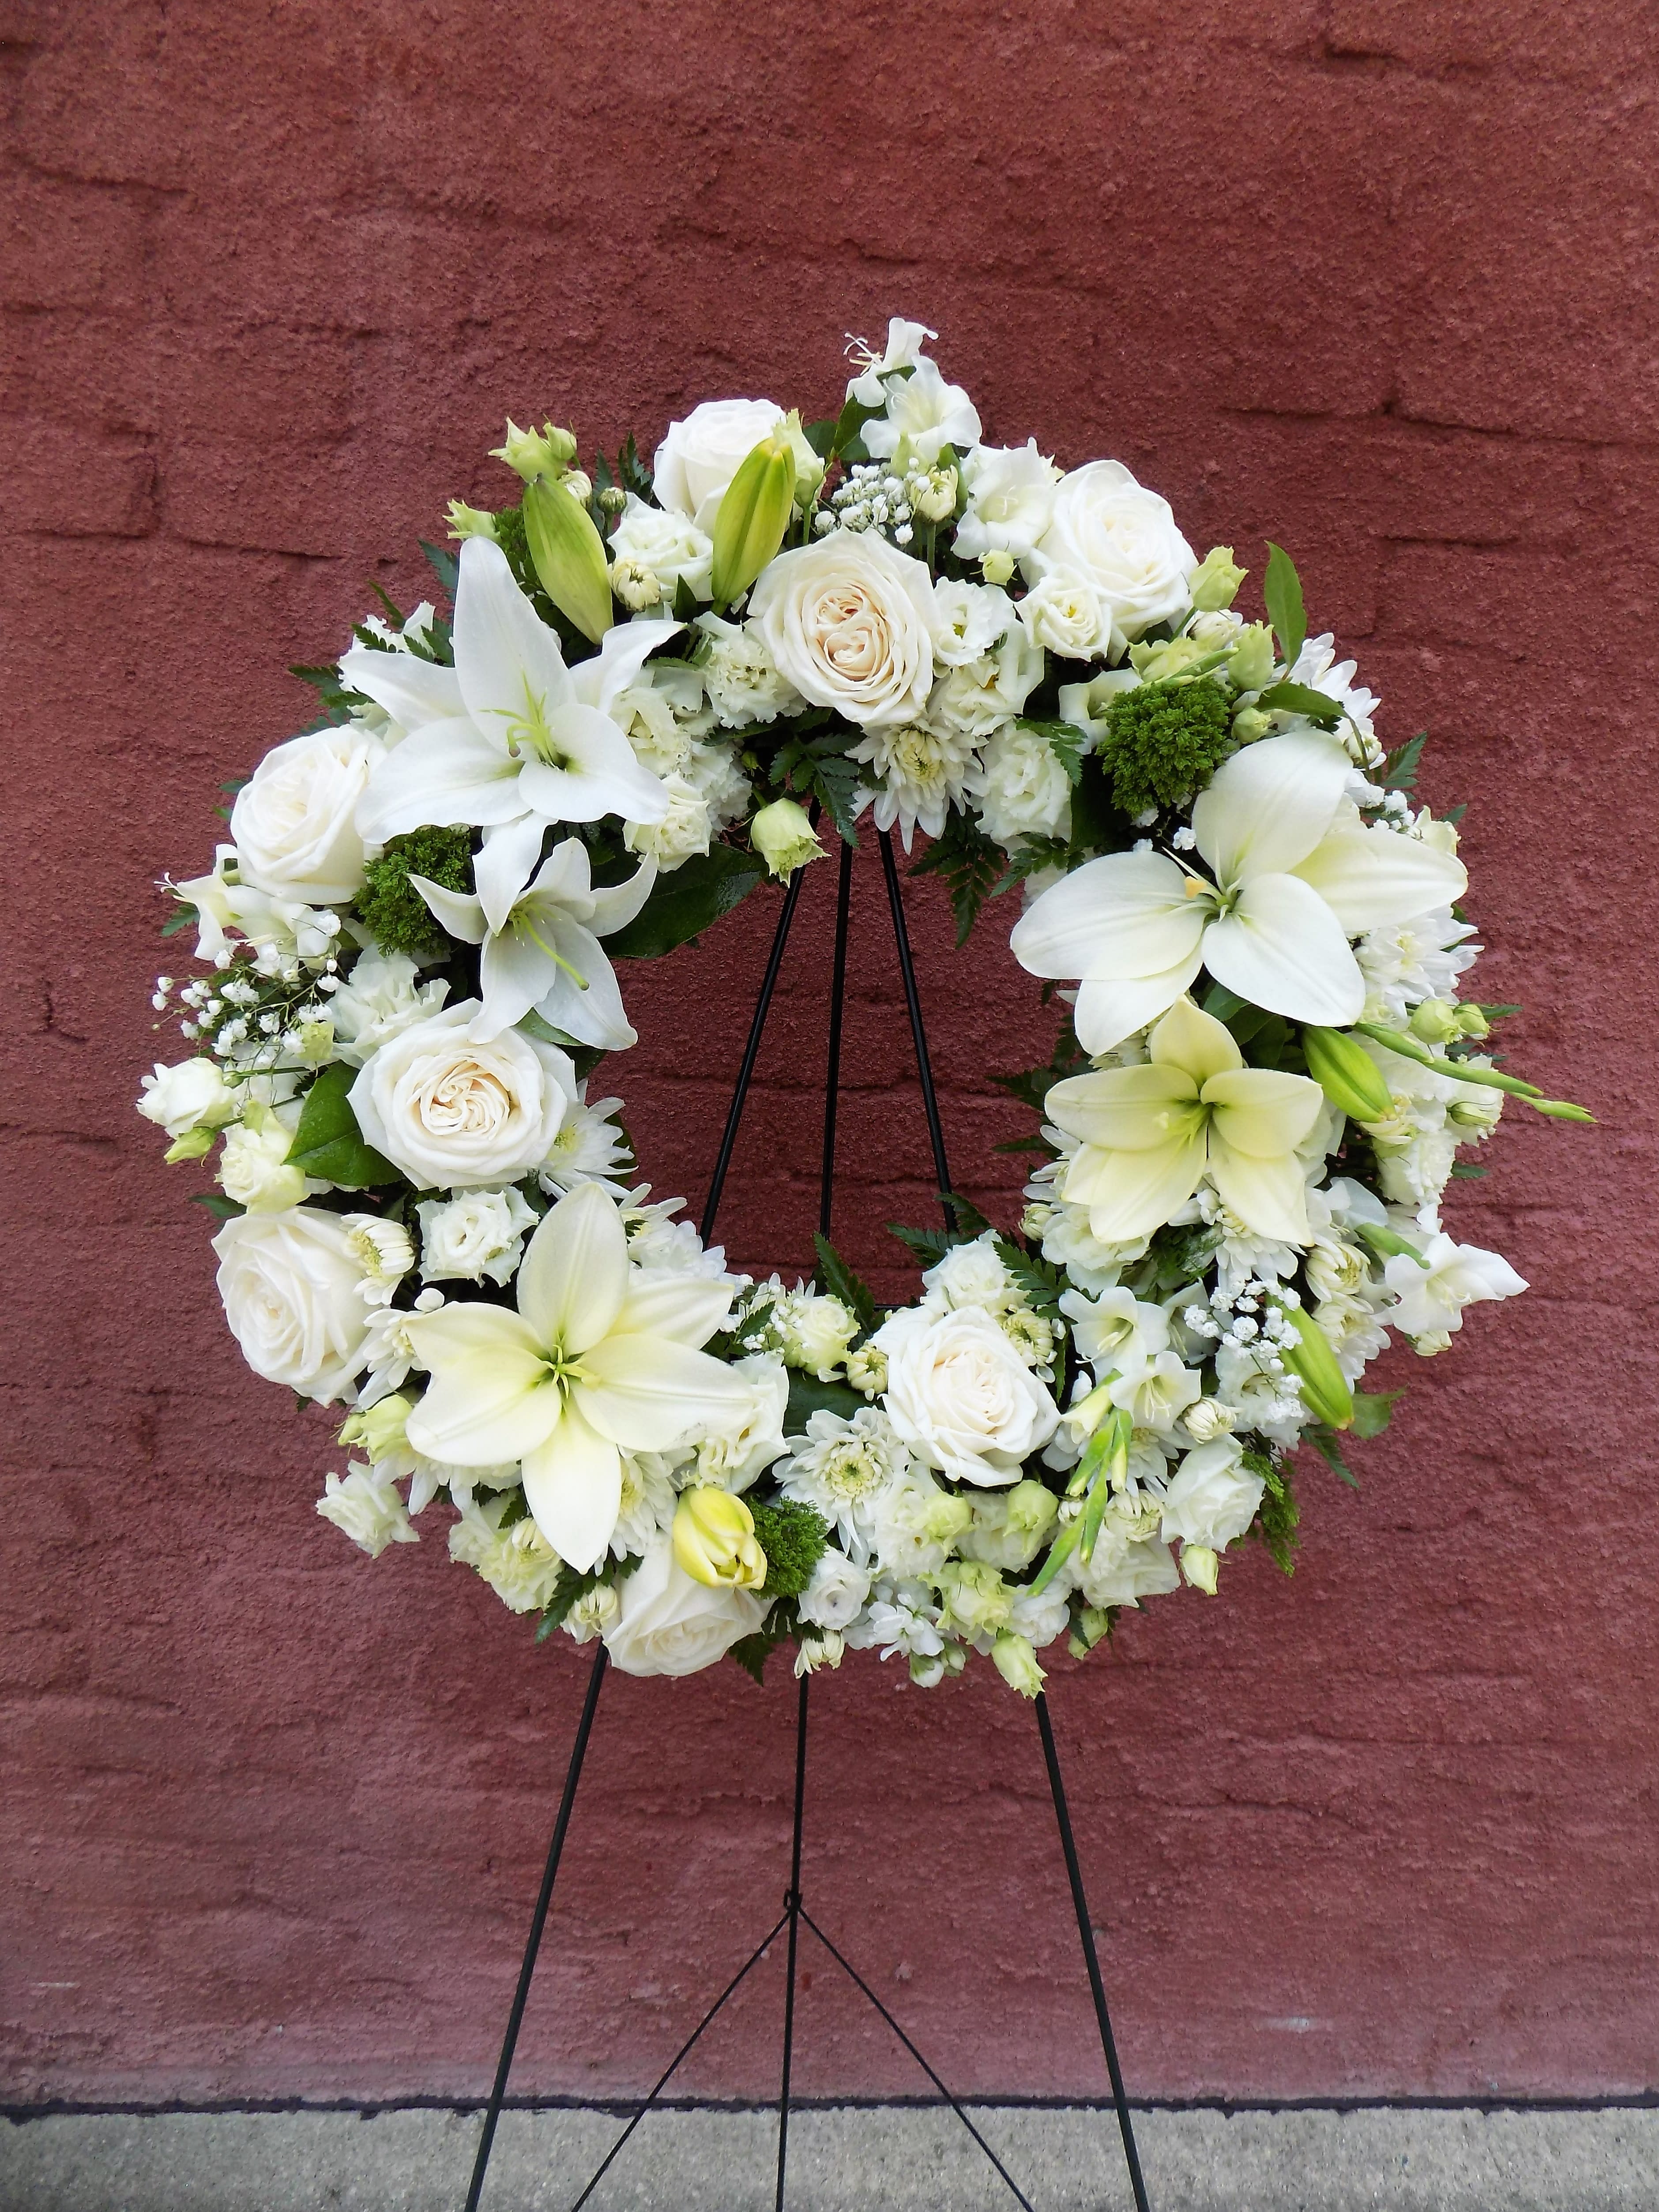 Circle of Serenity - An all-white standing spray wreath featuring a peaceful array of white blossoms. Roses, lilies, mums, and babysbreath come together into a serene and beautiful design! We specialize in custom-designs, and this arrangement can be designed in an array of different colors. Please call us at 320-587-3110 to customize this design, and we will do our best to accommodate all requests! 